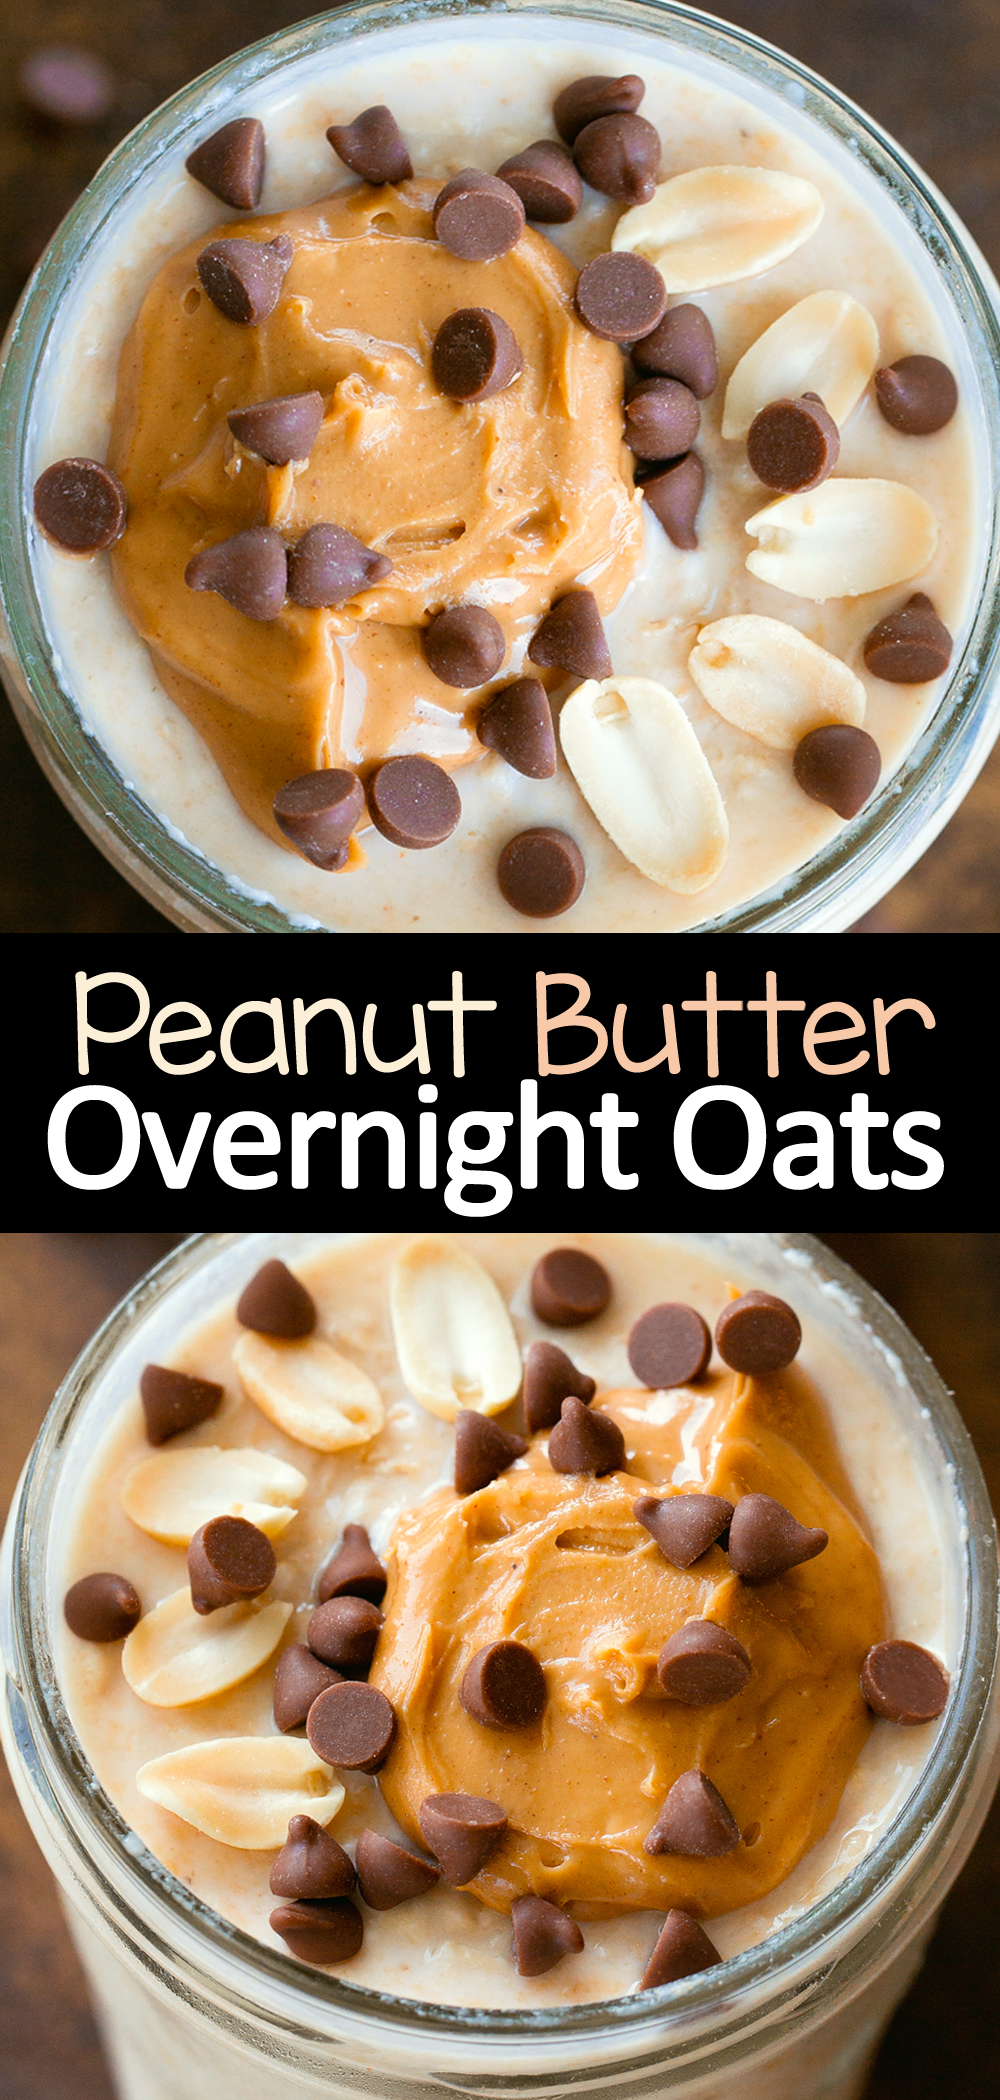 My Favorite Overnight Oats (Meal Prep Option) - Live Simply